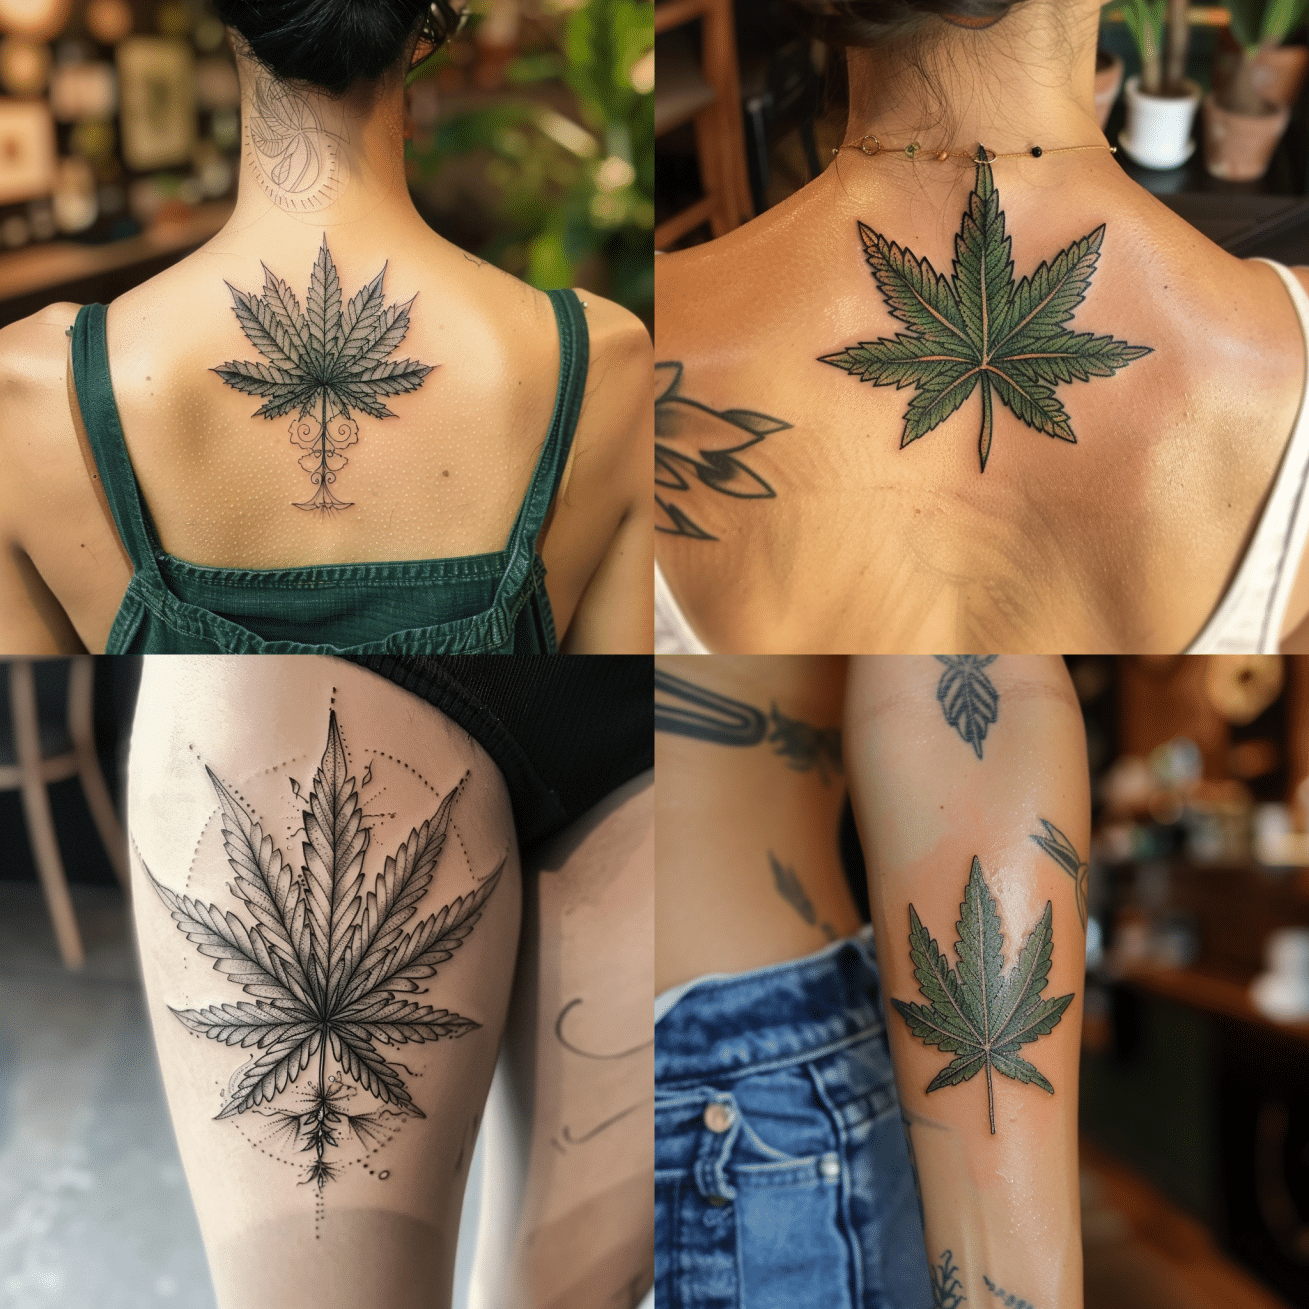 Some cool weed tattoos on the back